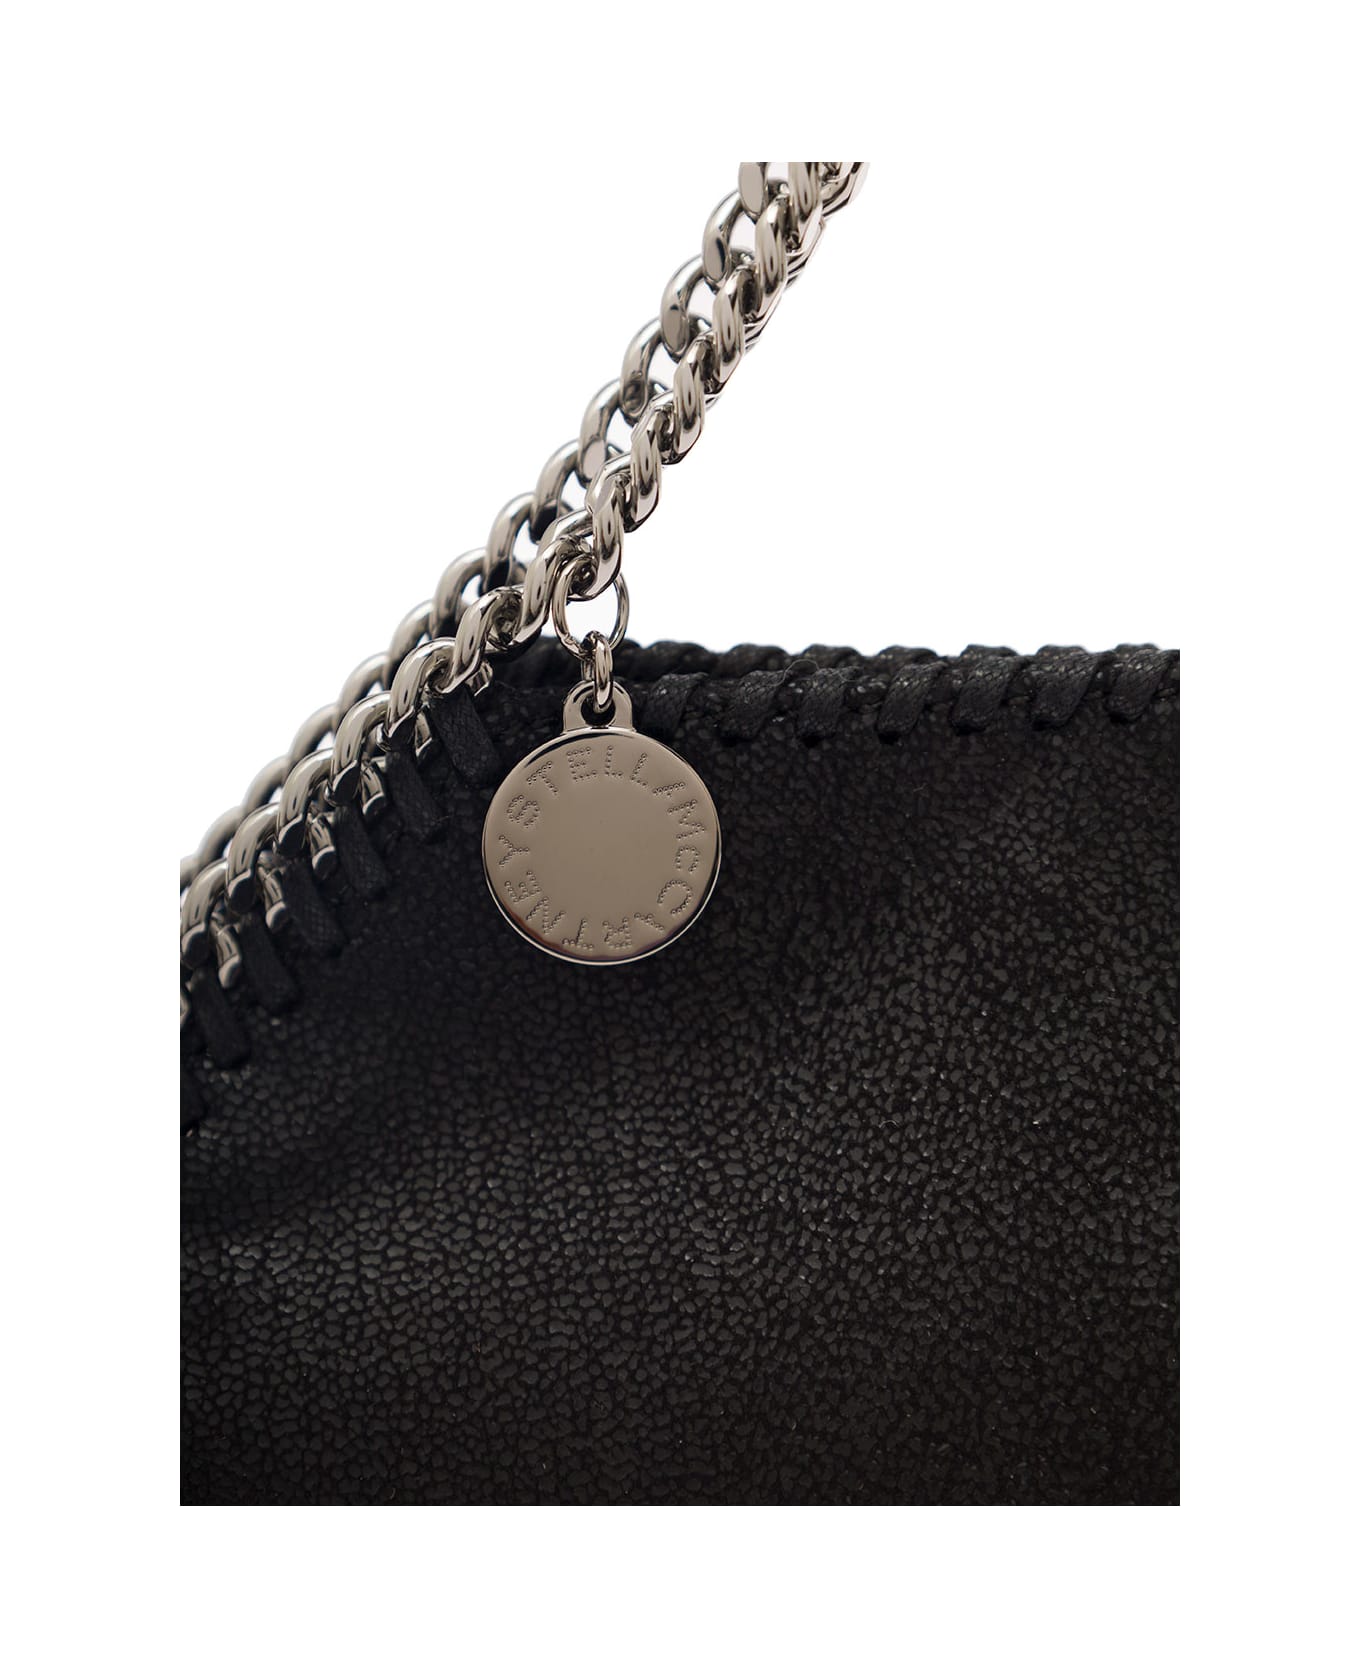 Stella McCartney '3chain' Mini Black Tote Bag With Logo Engraved On Charm In Faux Leather Woman - Black